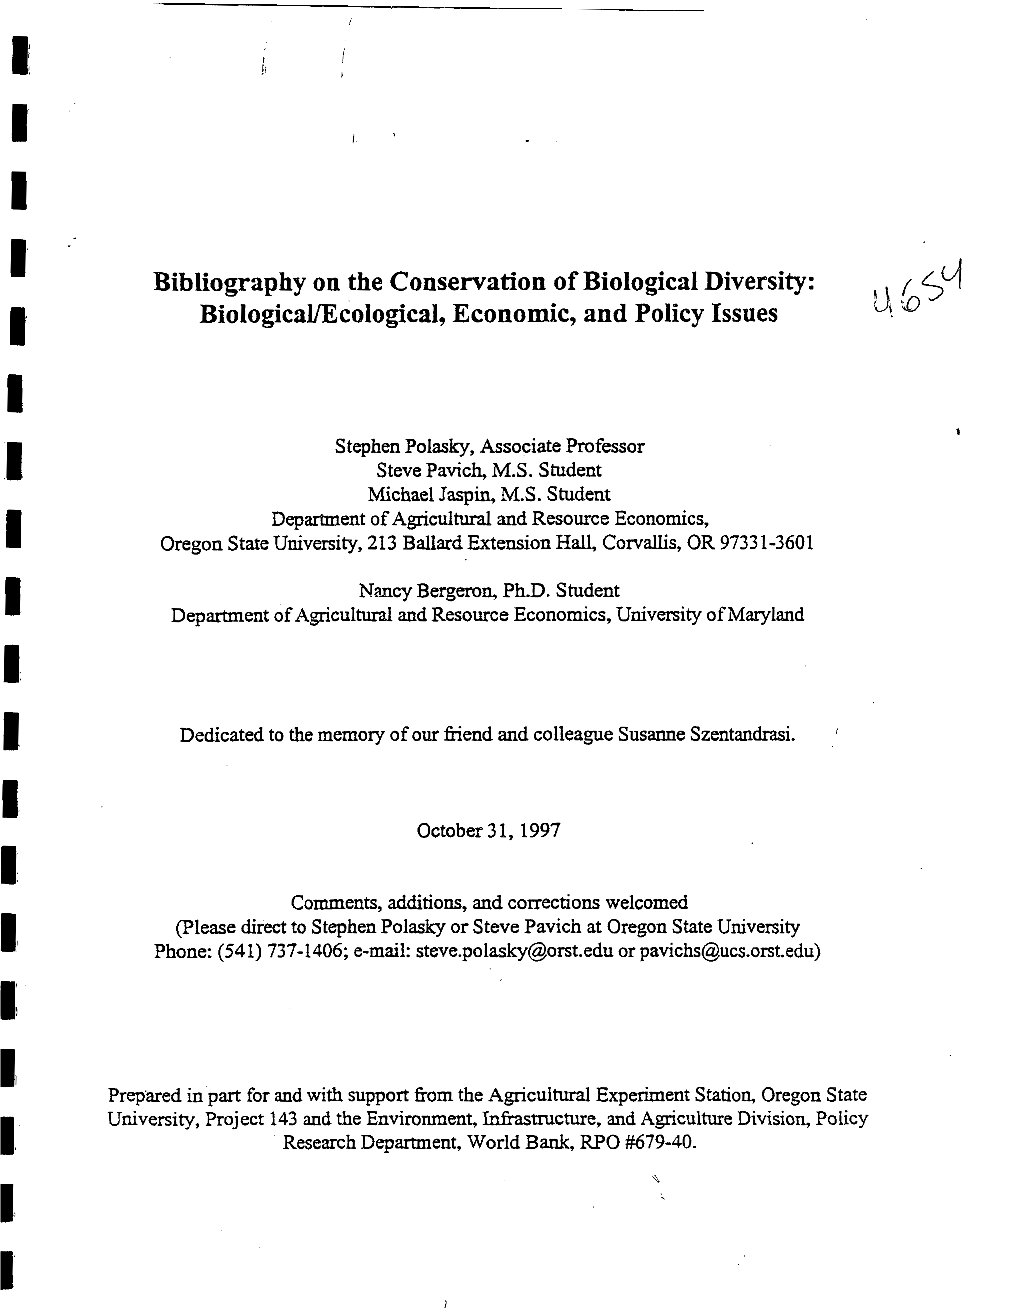 Bibliography on the Conservation of Biological Diversity: Biological